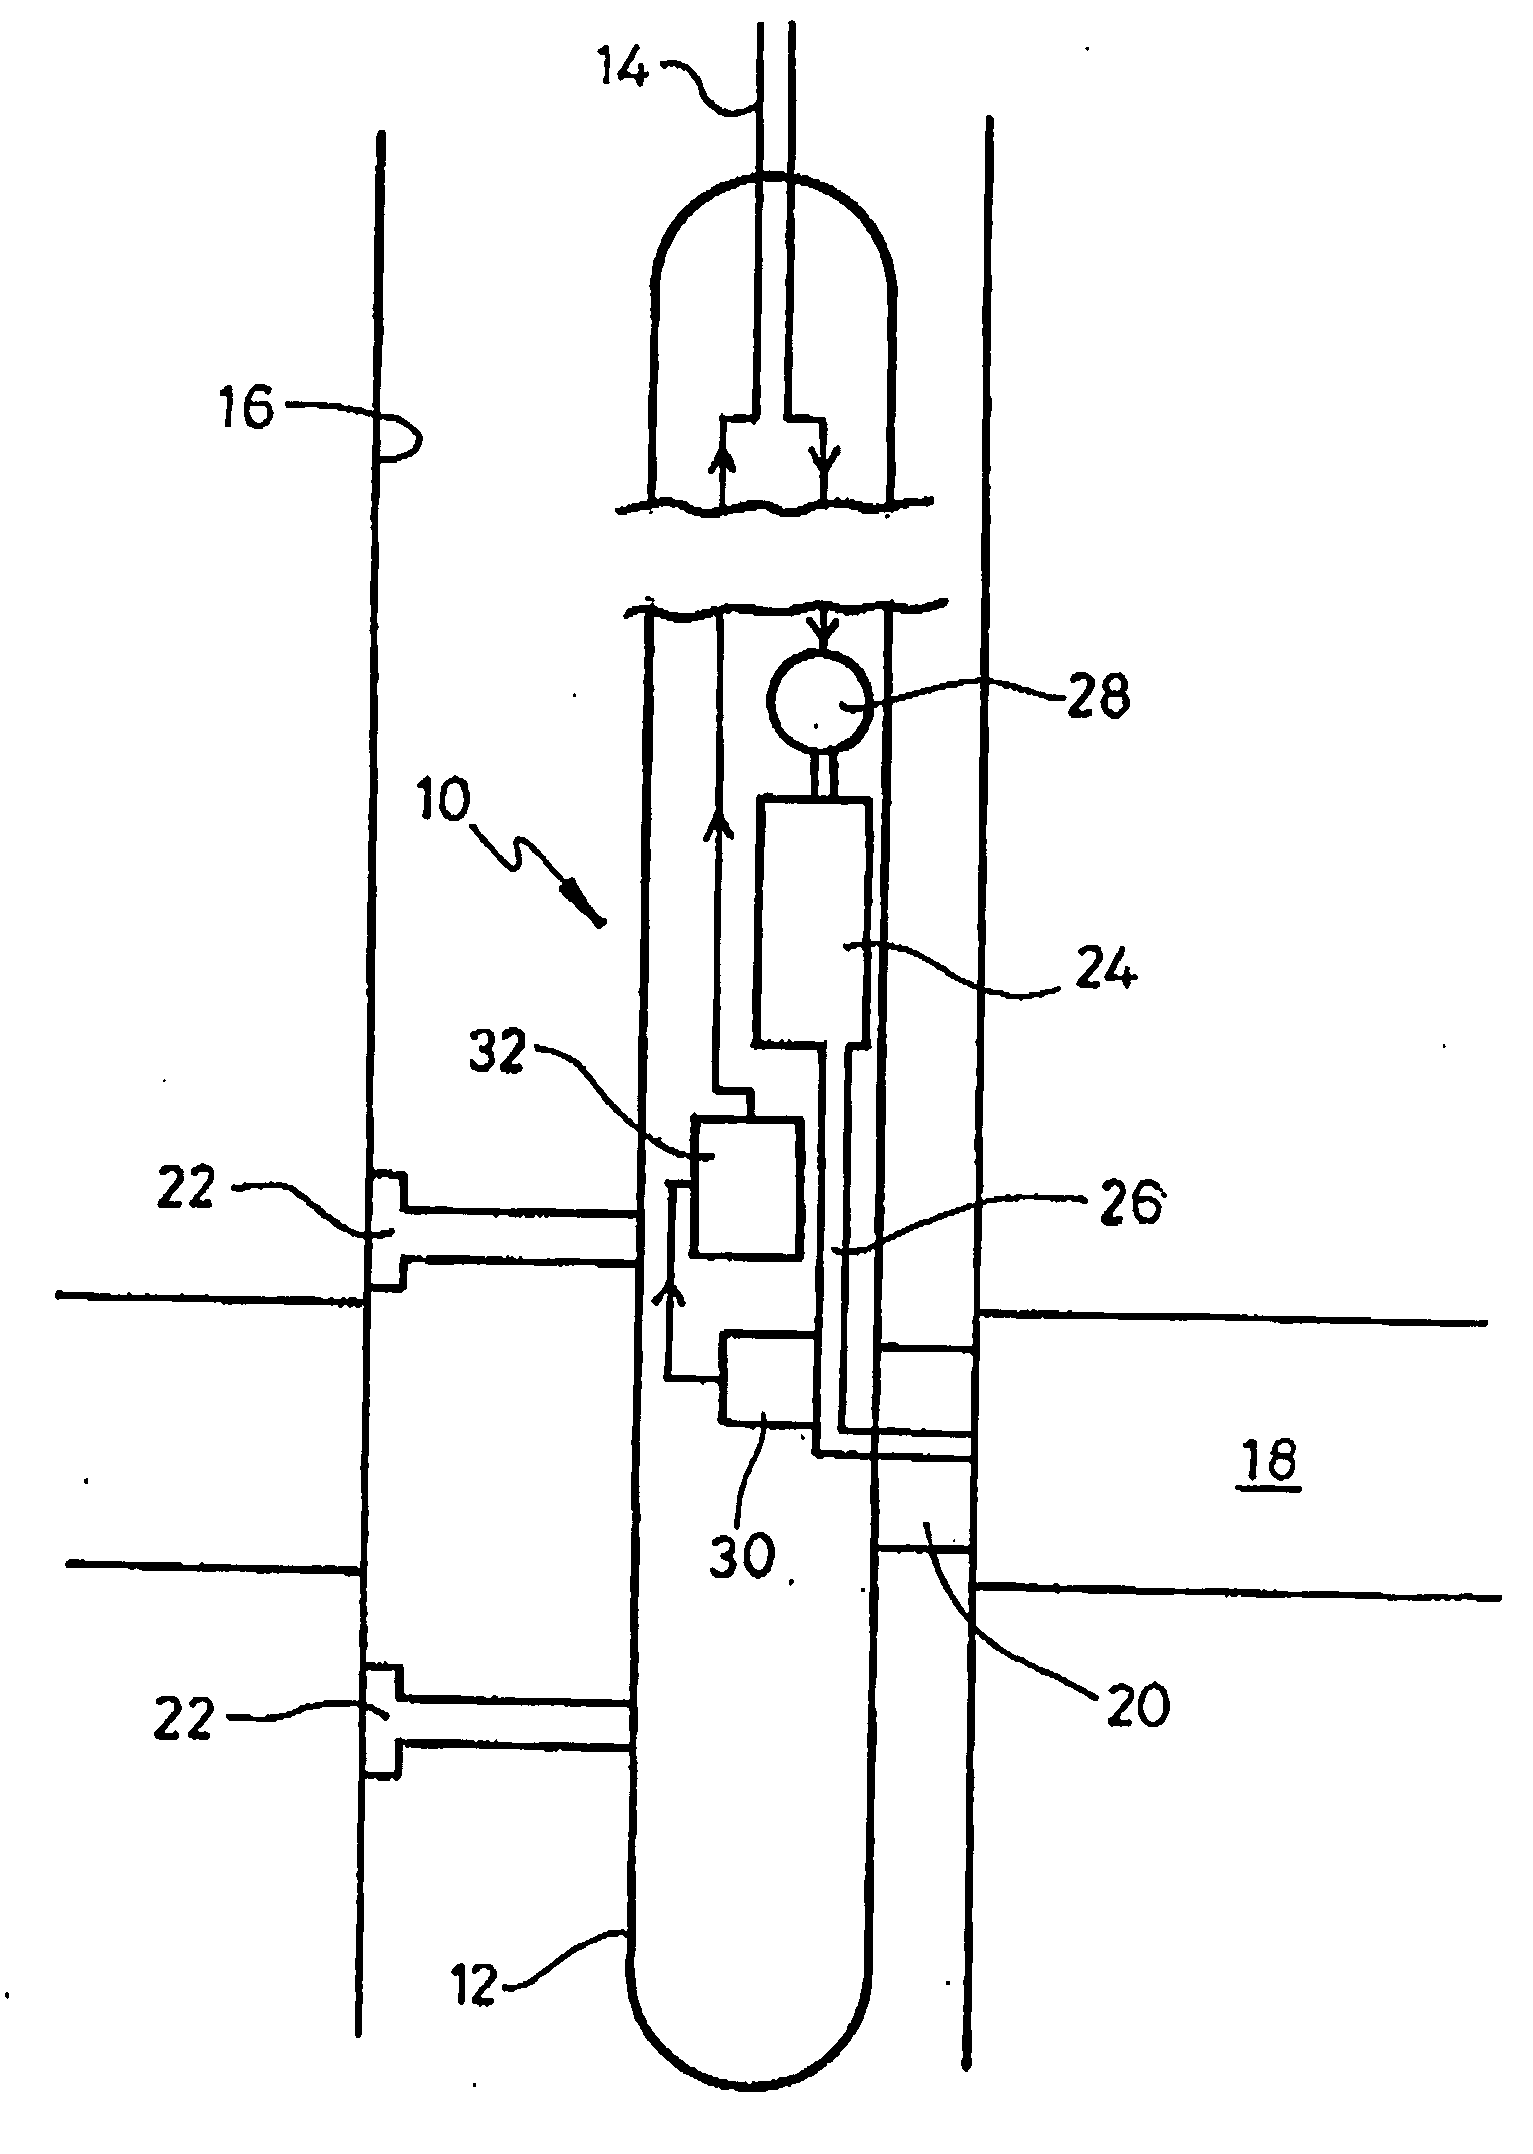 Methods and apparatus for the measurement of hydrogen sulphide and thiols in fluids